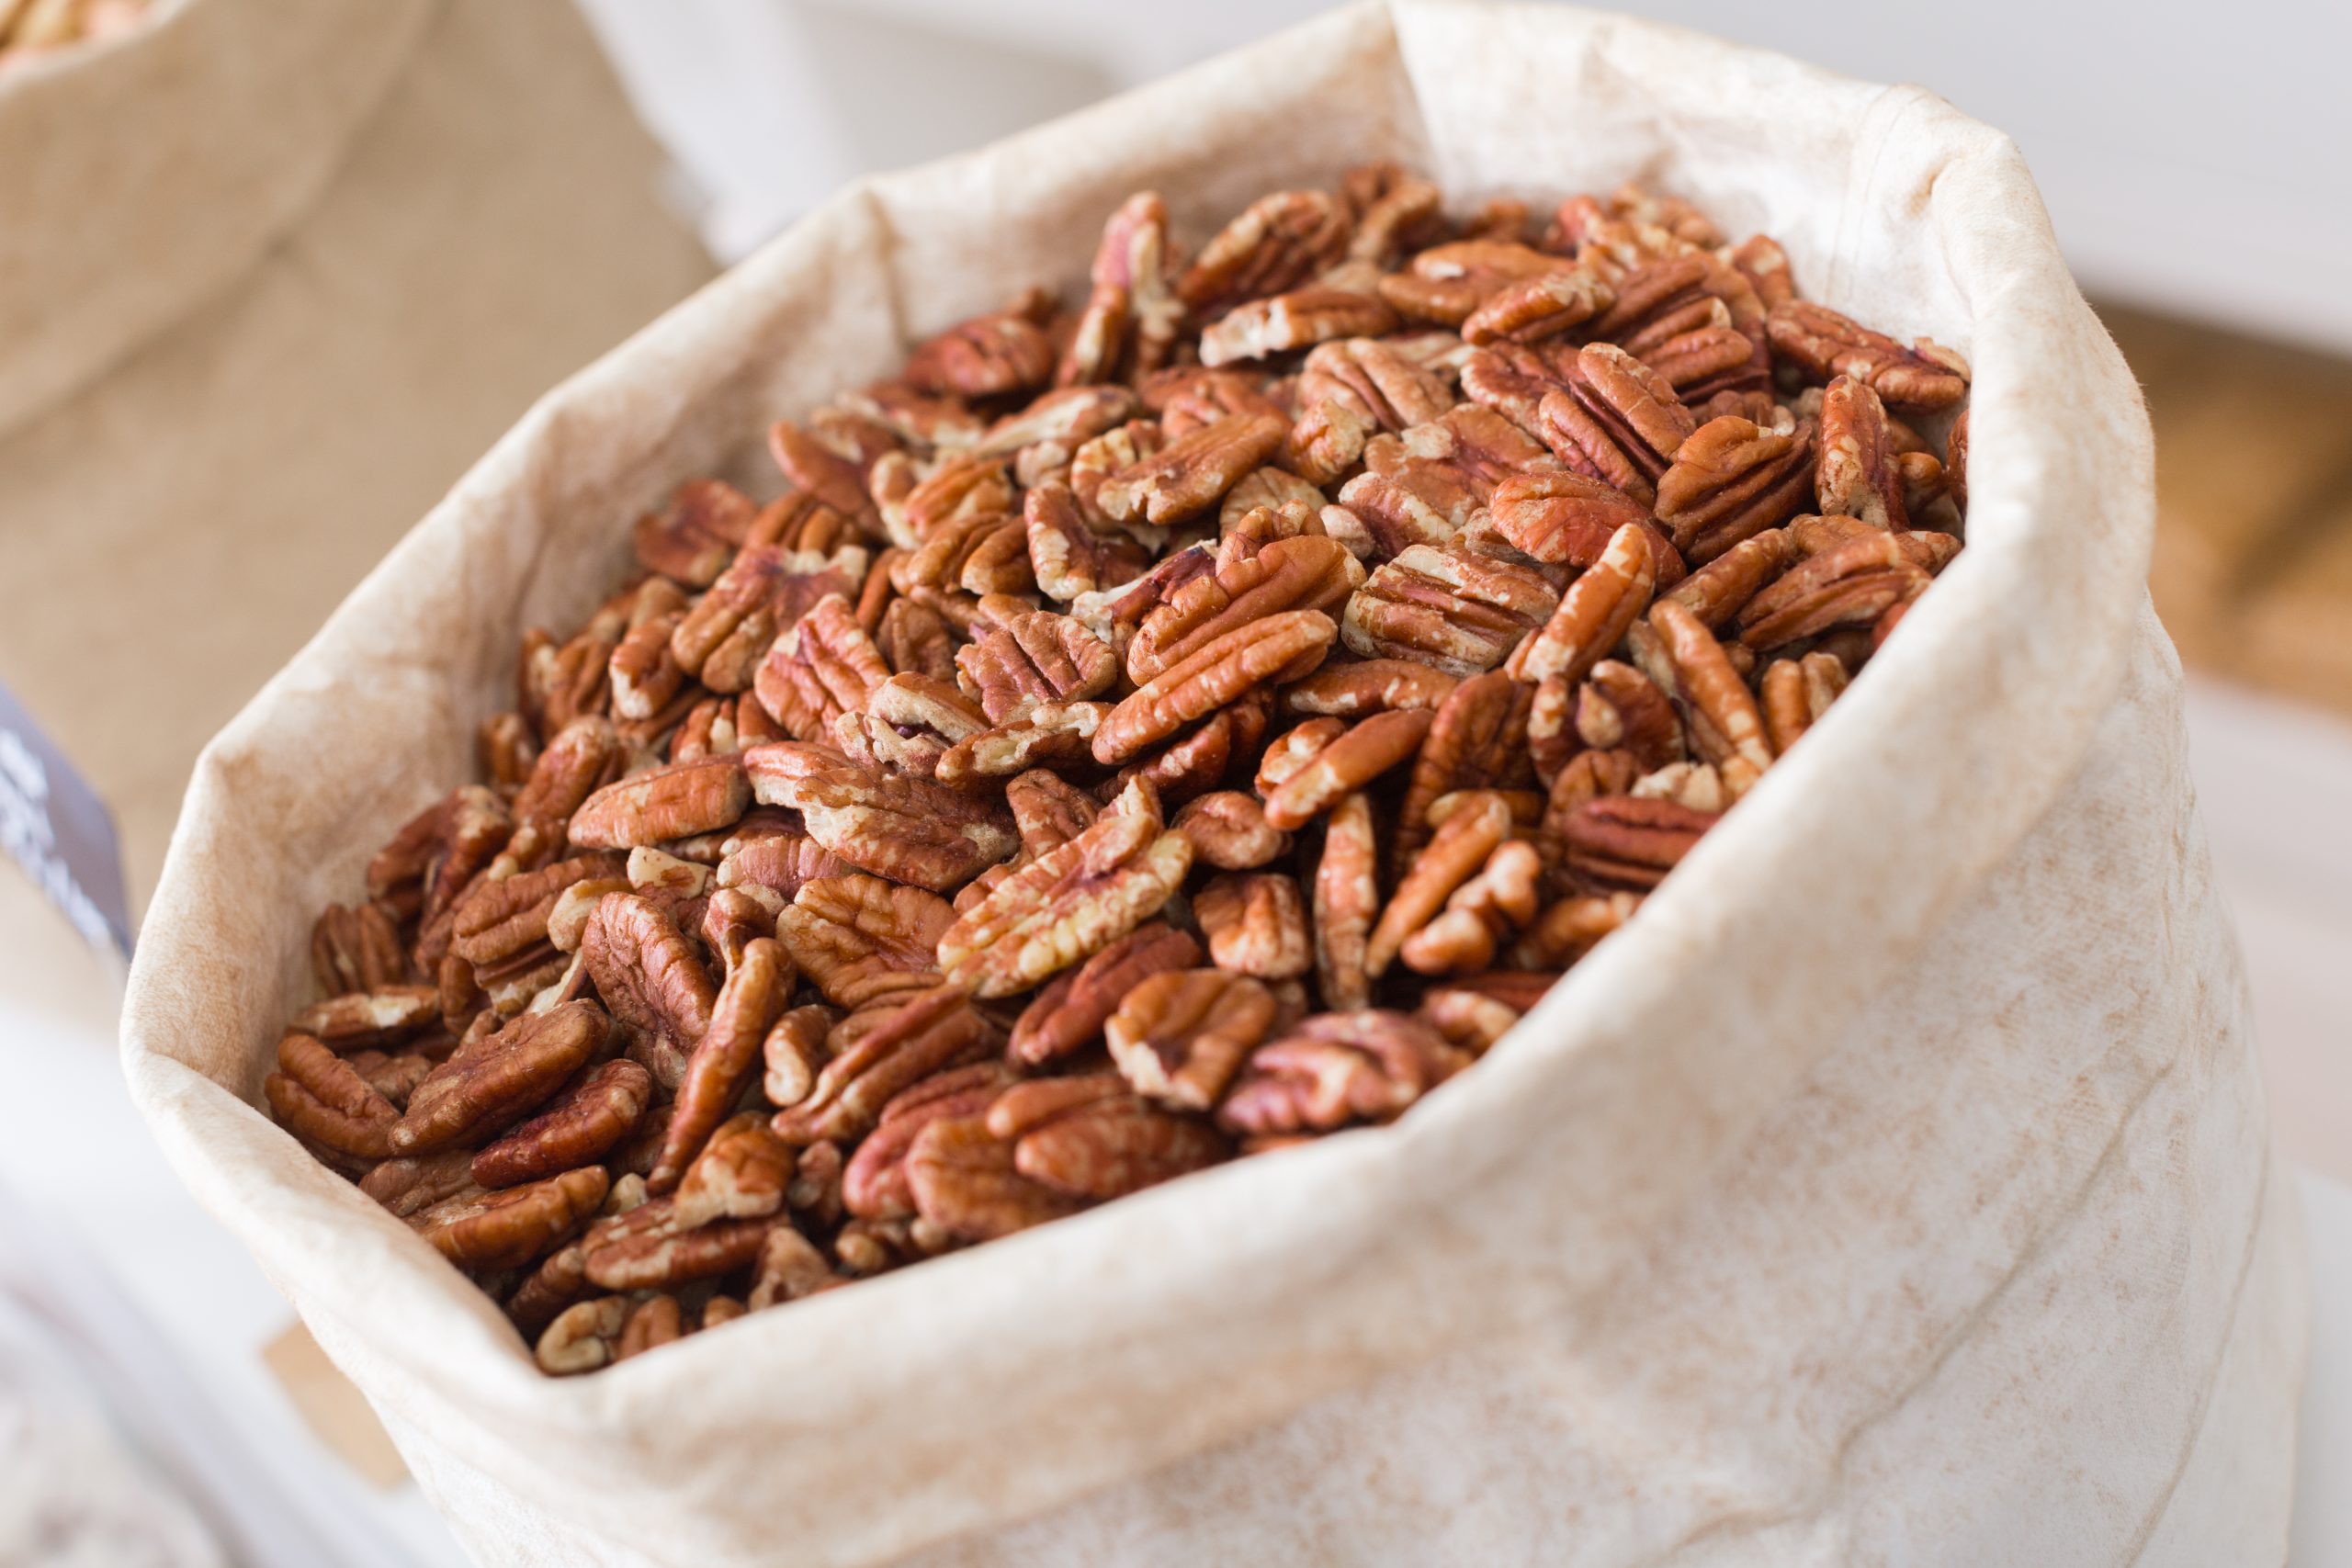 Featured image for “Improved Pecan Production Expected in 2022”